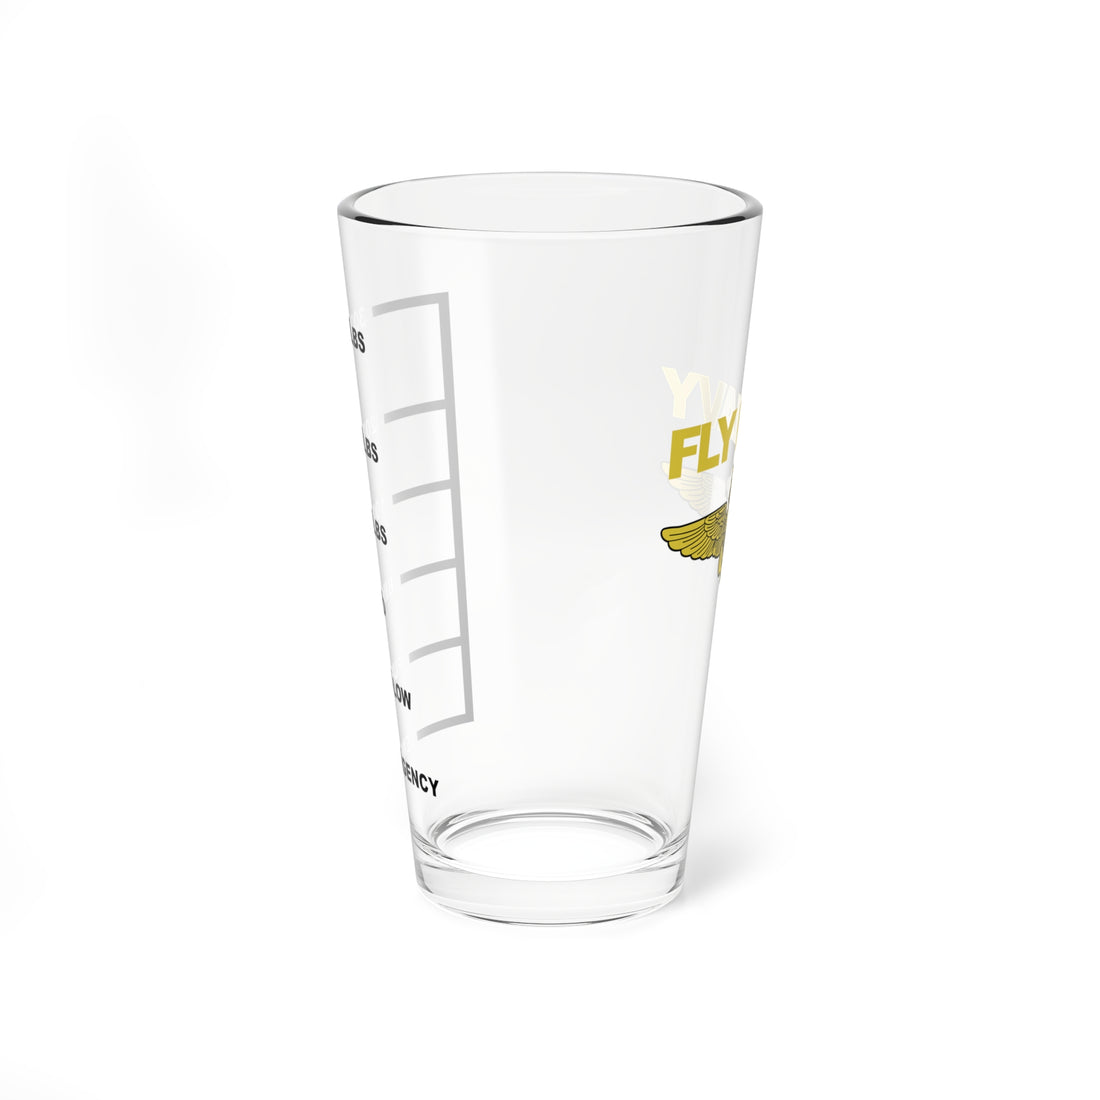 Fly Navy Fuel Low Pint Glass Mixing Glass 16oz